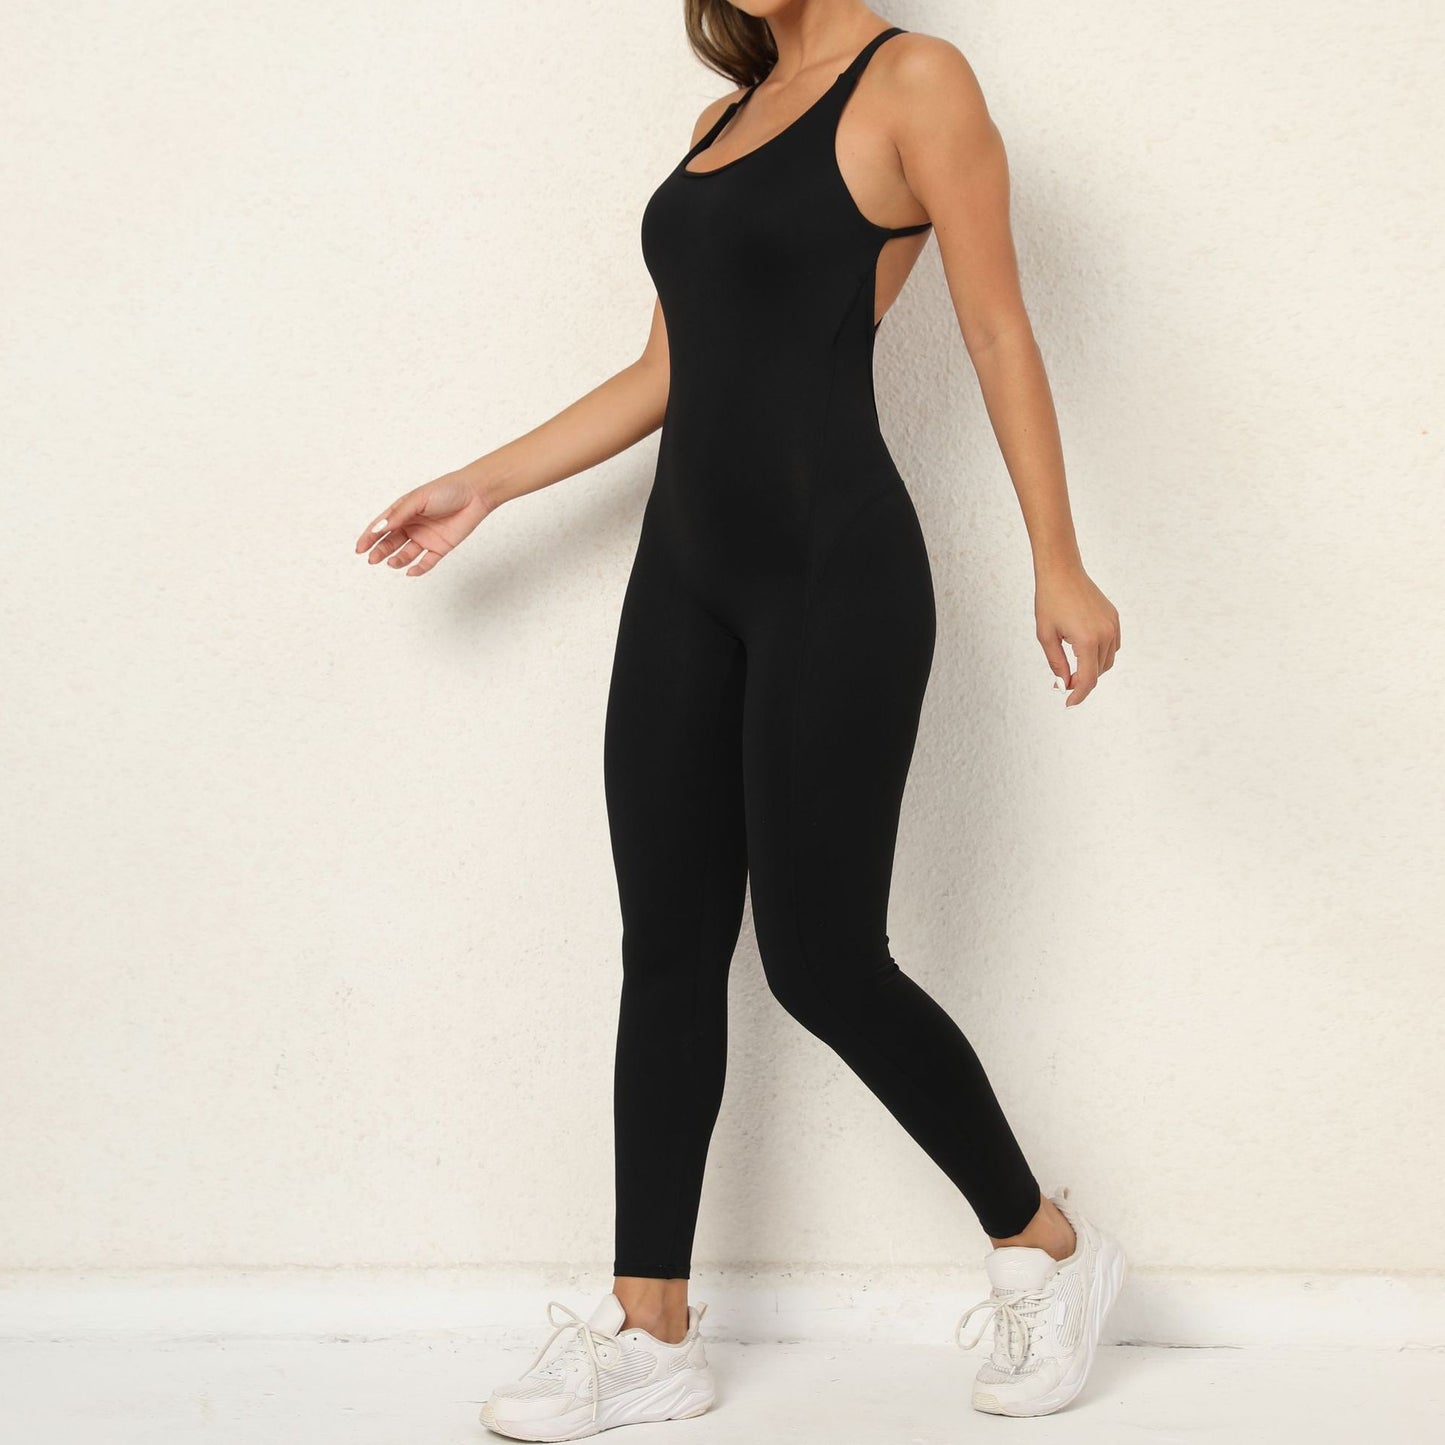 Wrinkle Hip Raise Yoga Pants Quick Drying Skinny Running Sports Fitness Jumpsuit